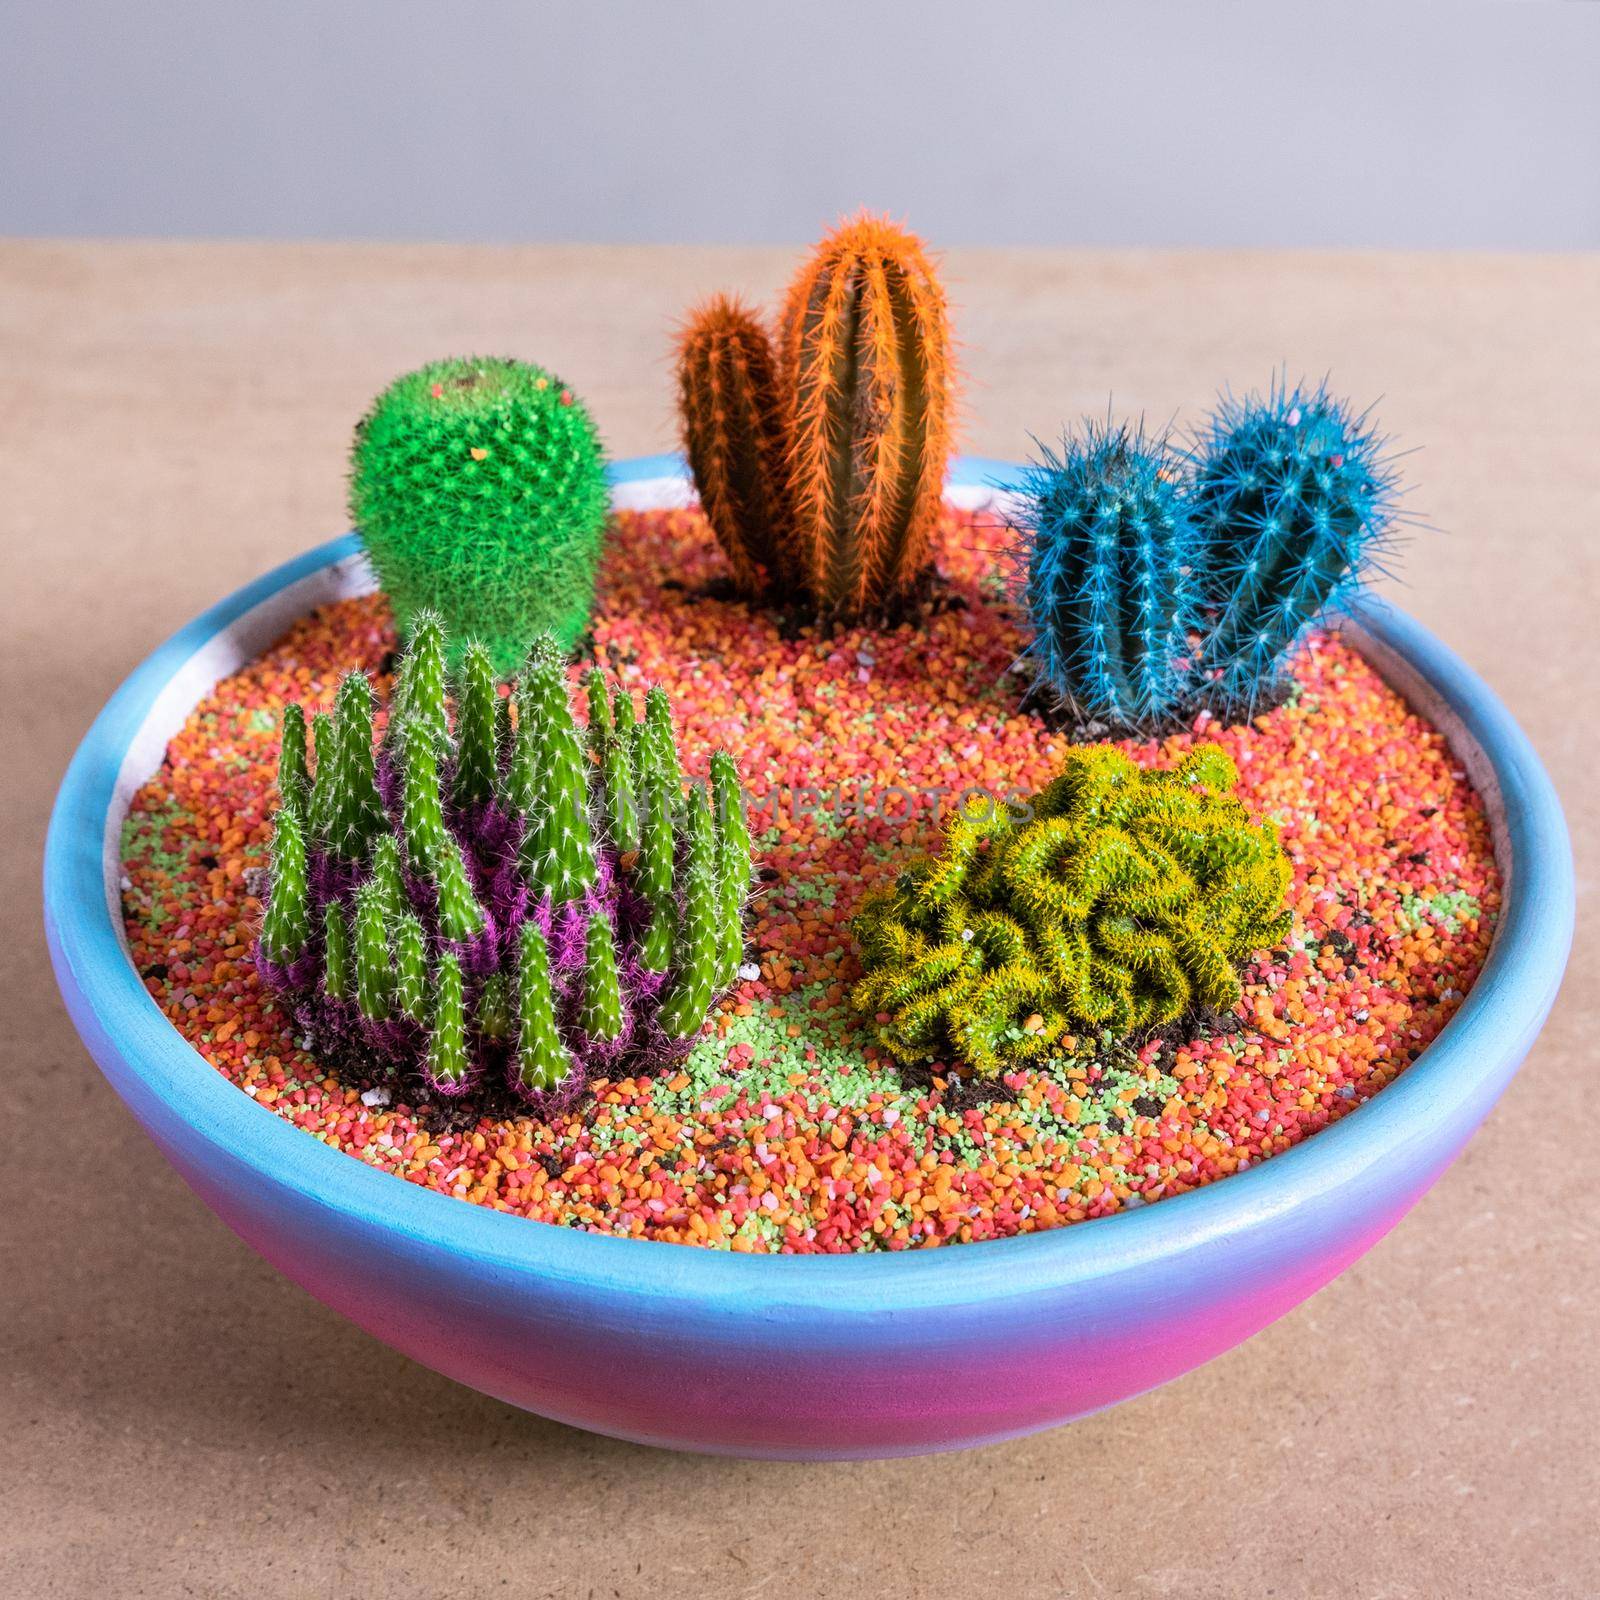 Terrarium, sand, rock, succulent, painted cactus in the rainbow colorful pot by ferhad